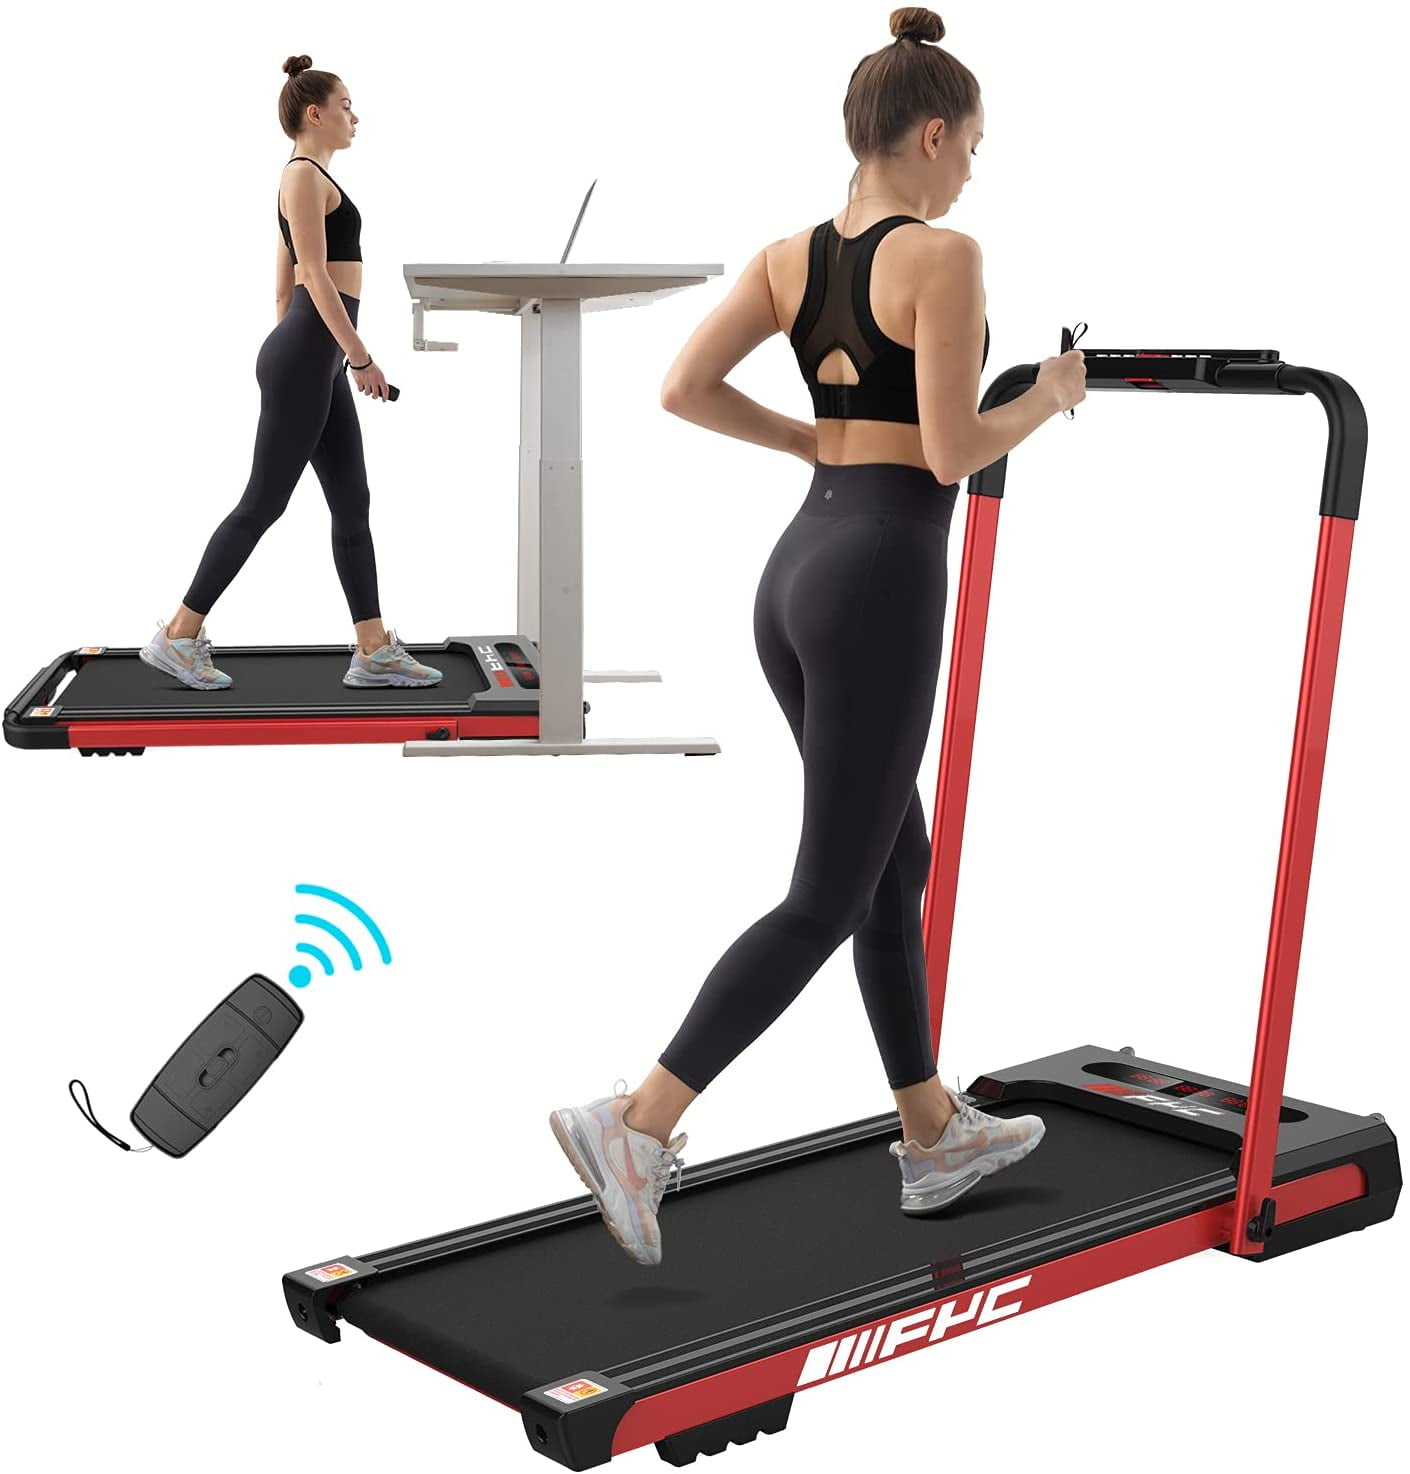 Details about   2.25/2.5HP Portable Electric Desk Treadmill for Walking Running Jogging Machine 